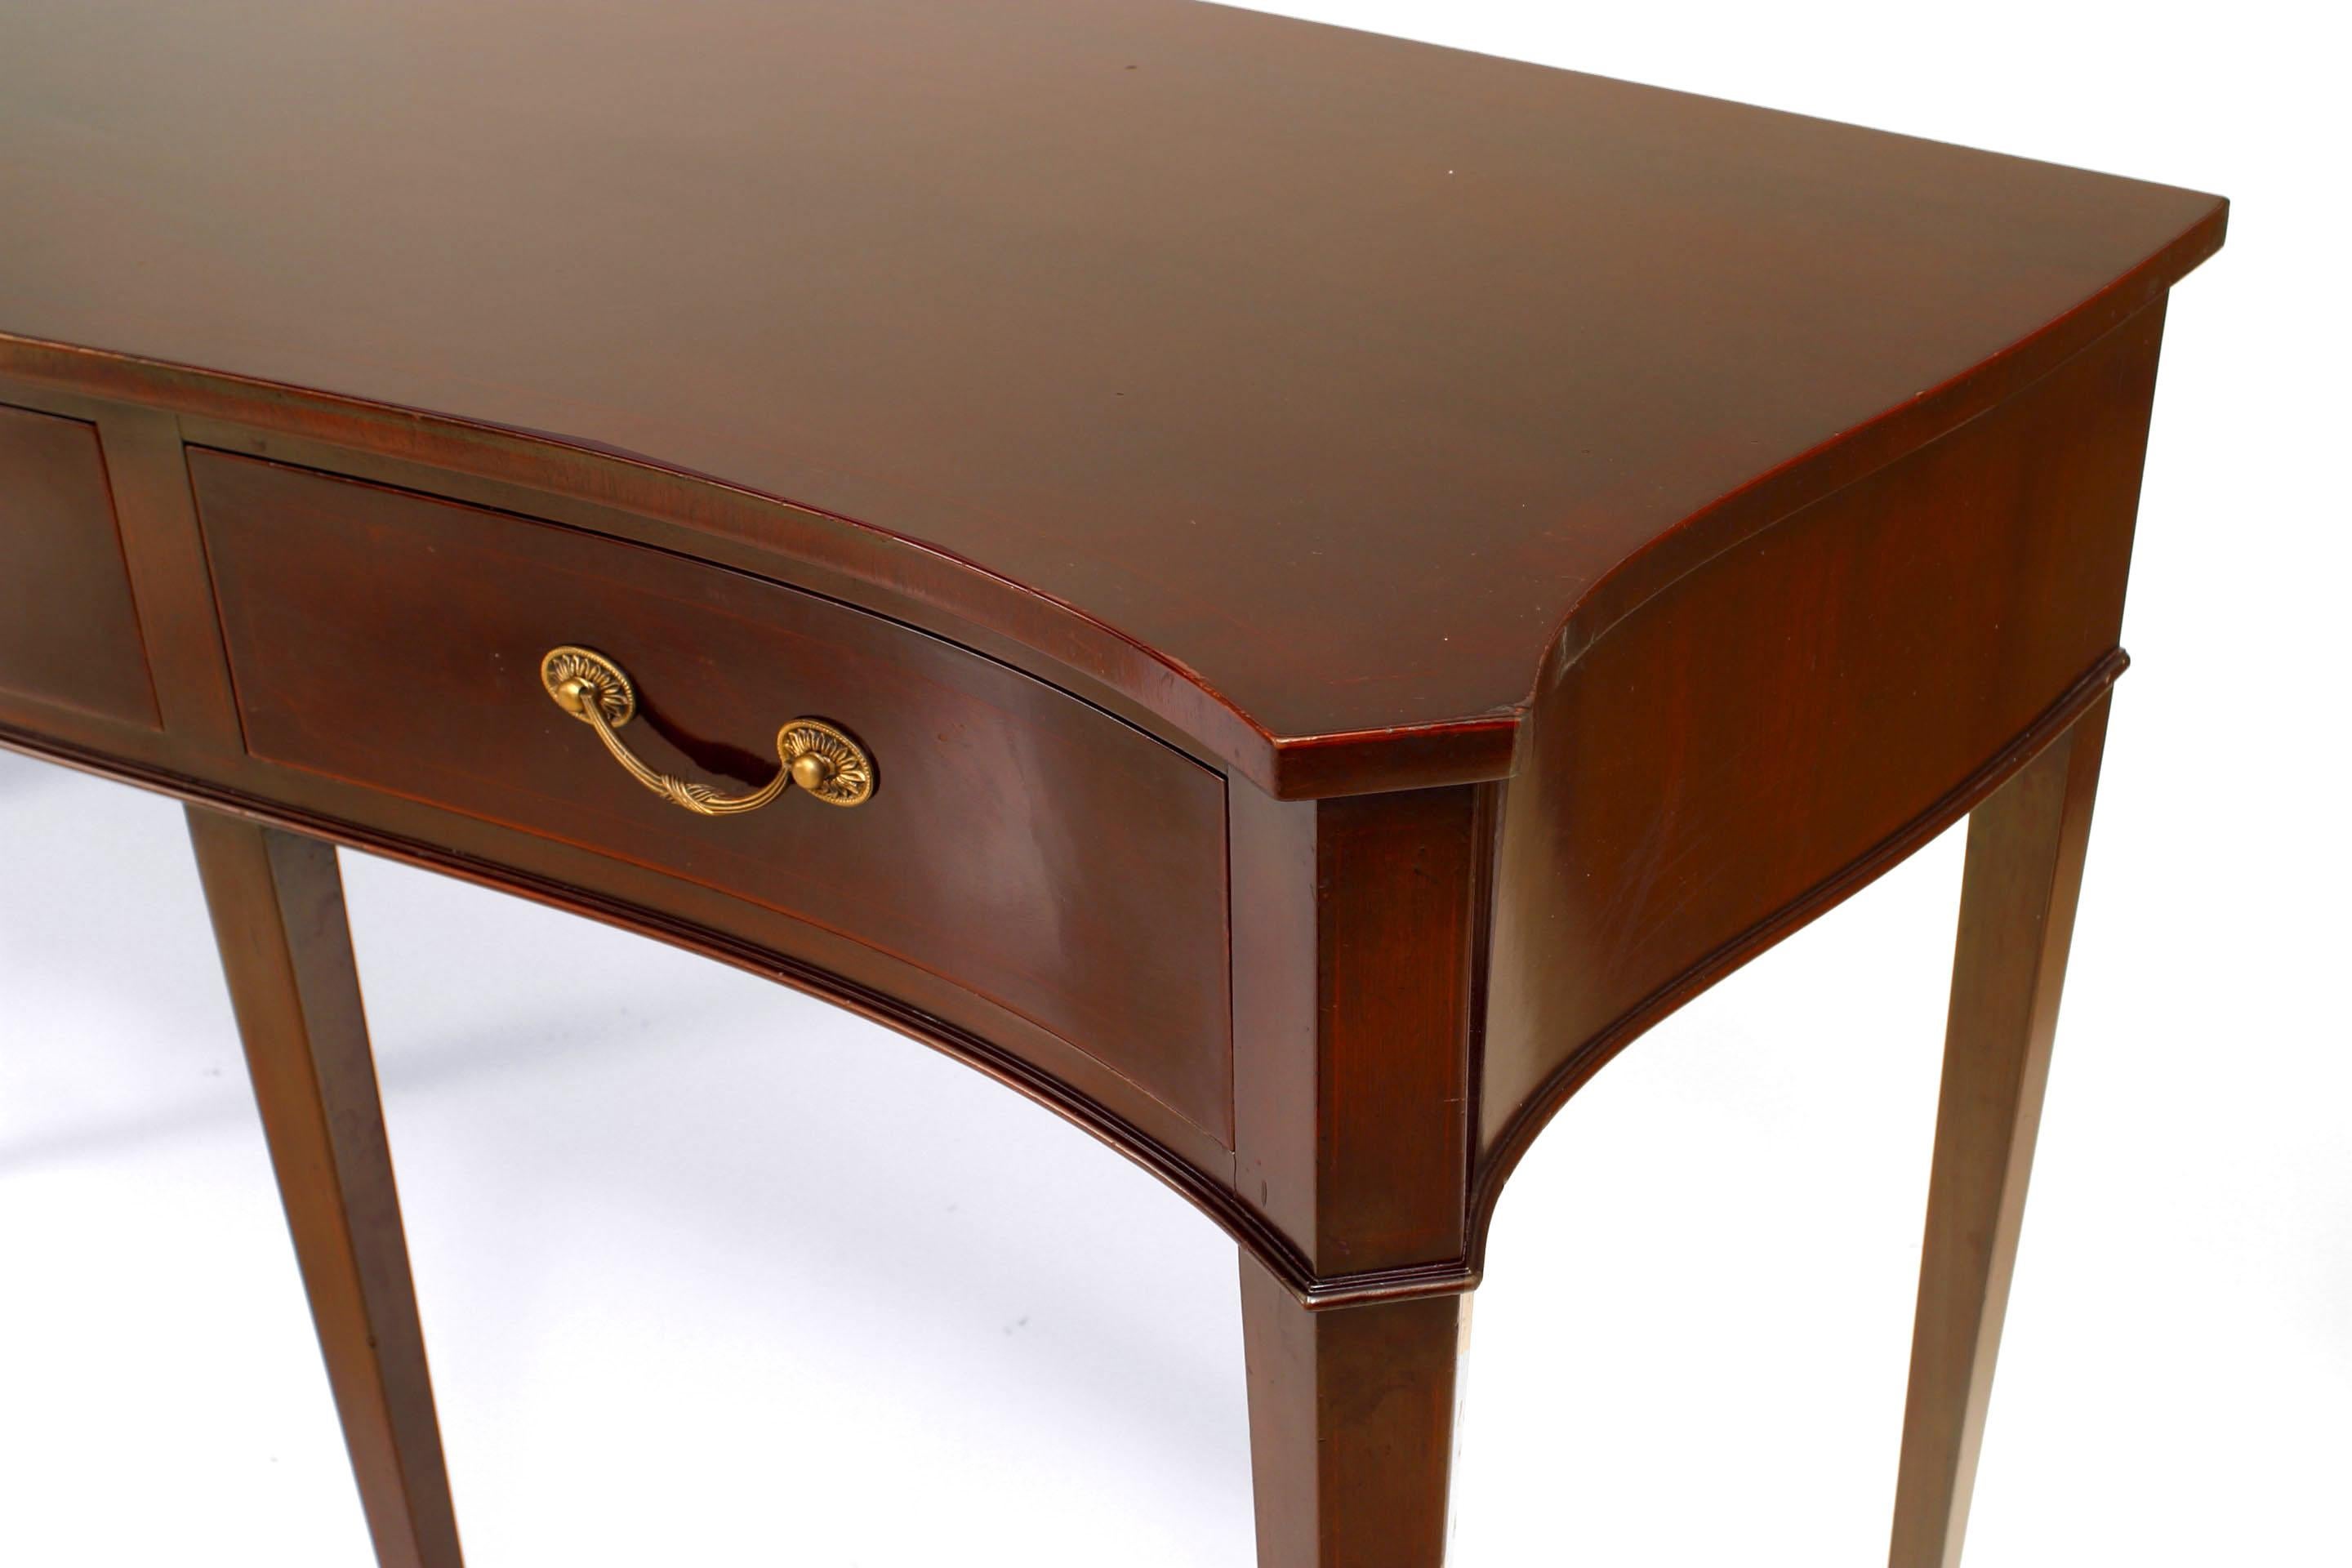 English Sheraton-style (20th Century) mahogany serpentine front console table with 3 drawers with brass hardware and banded inlay.
